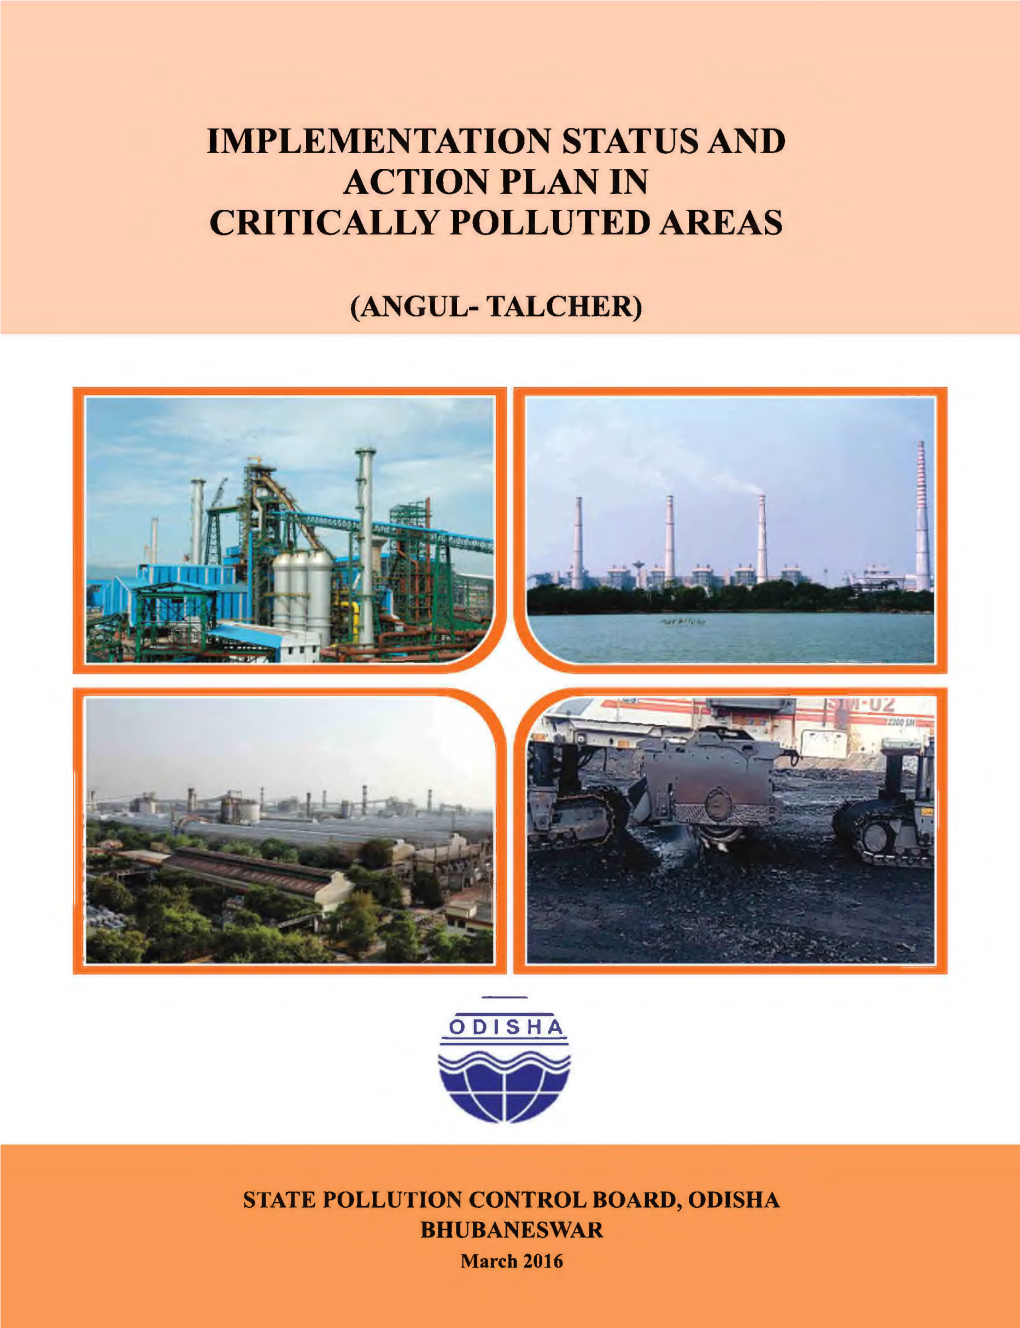 Implementation Status and Action Plan in Critically Polluted Areas